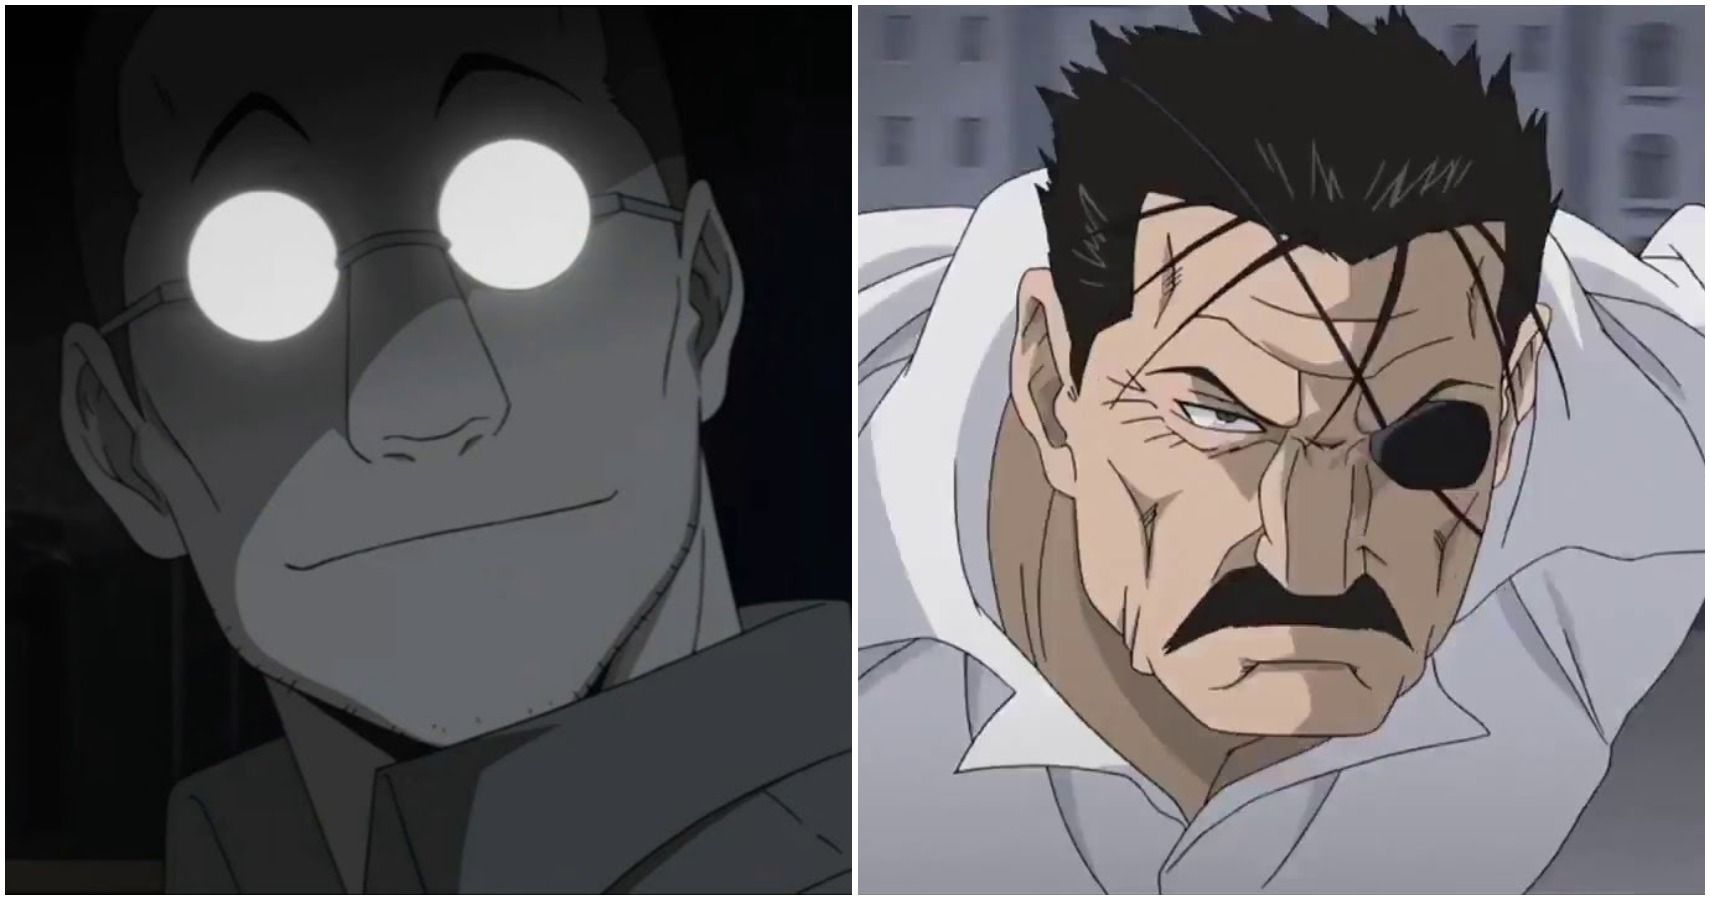 Who's the worst character in FMA/FMAB (Full Metal Alchemist)? - Quora